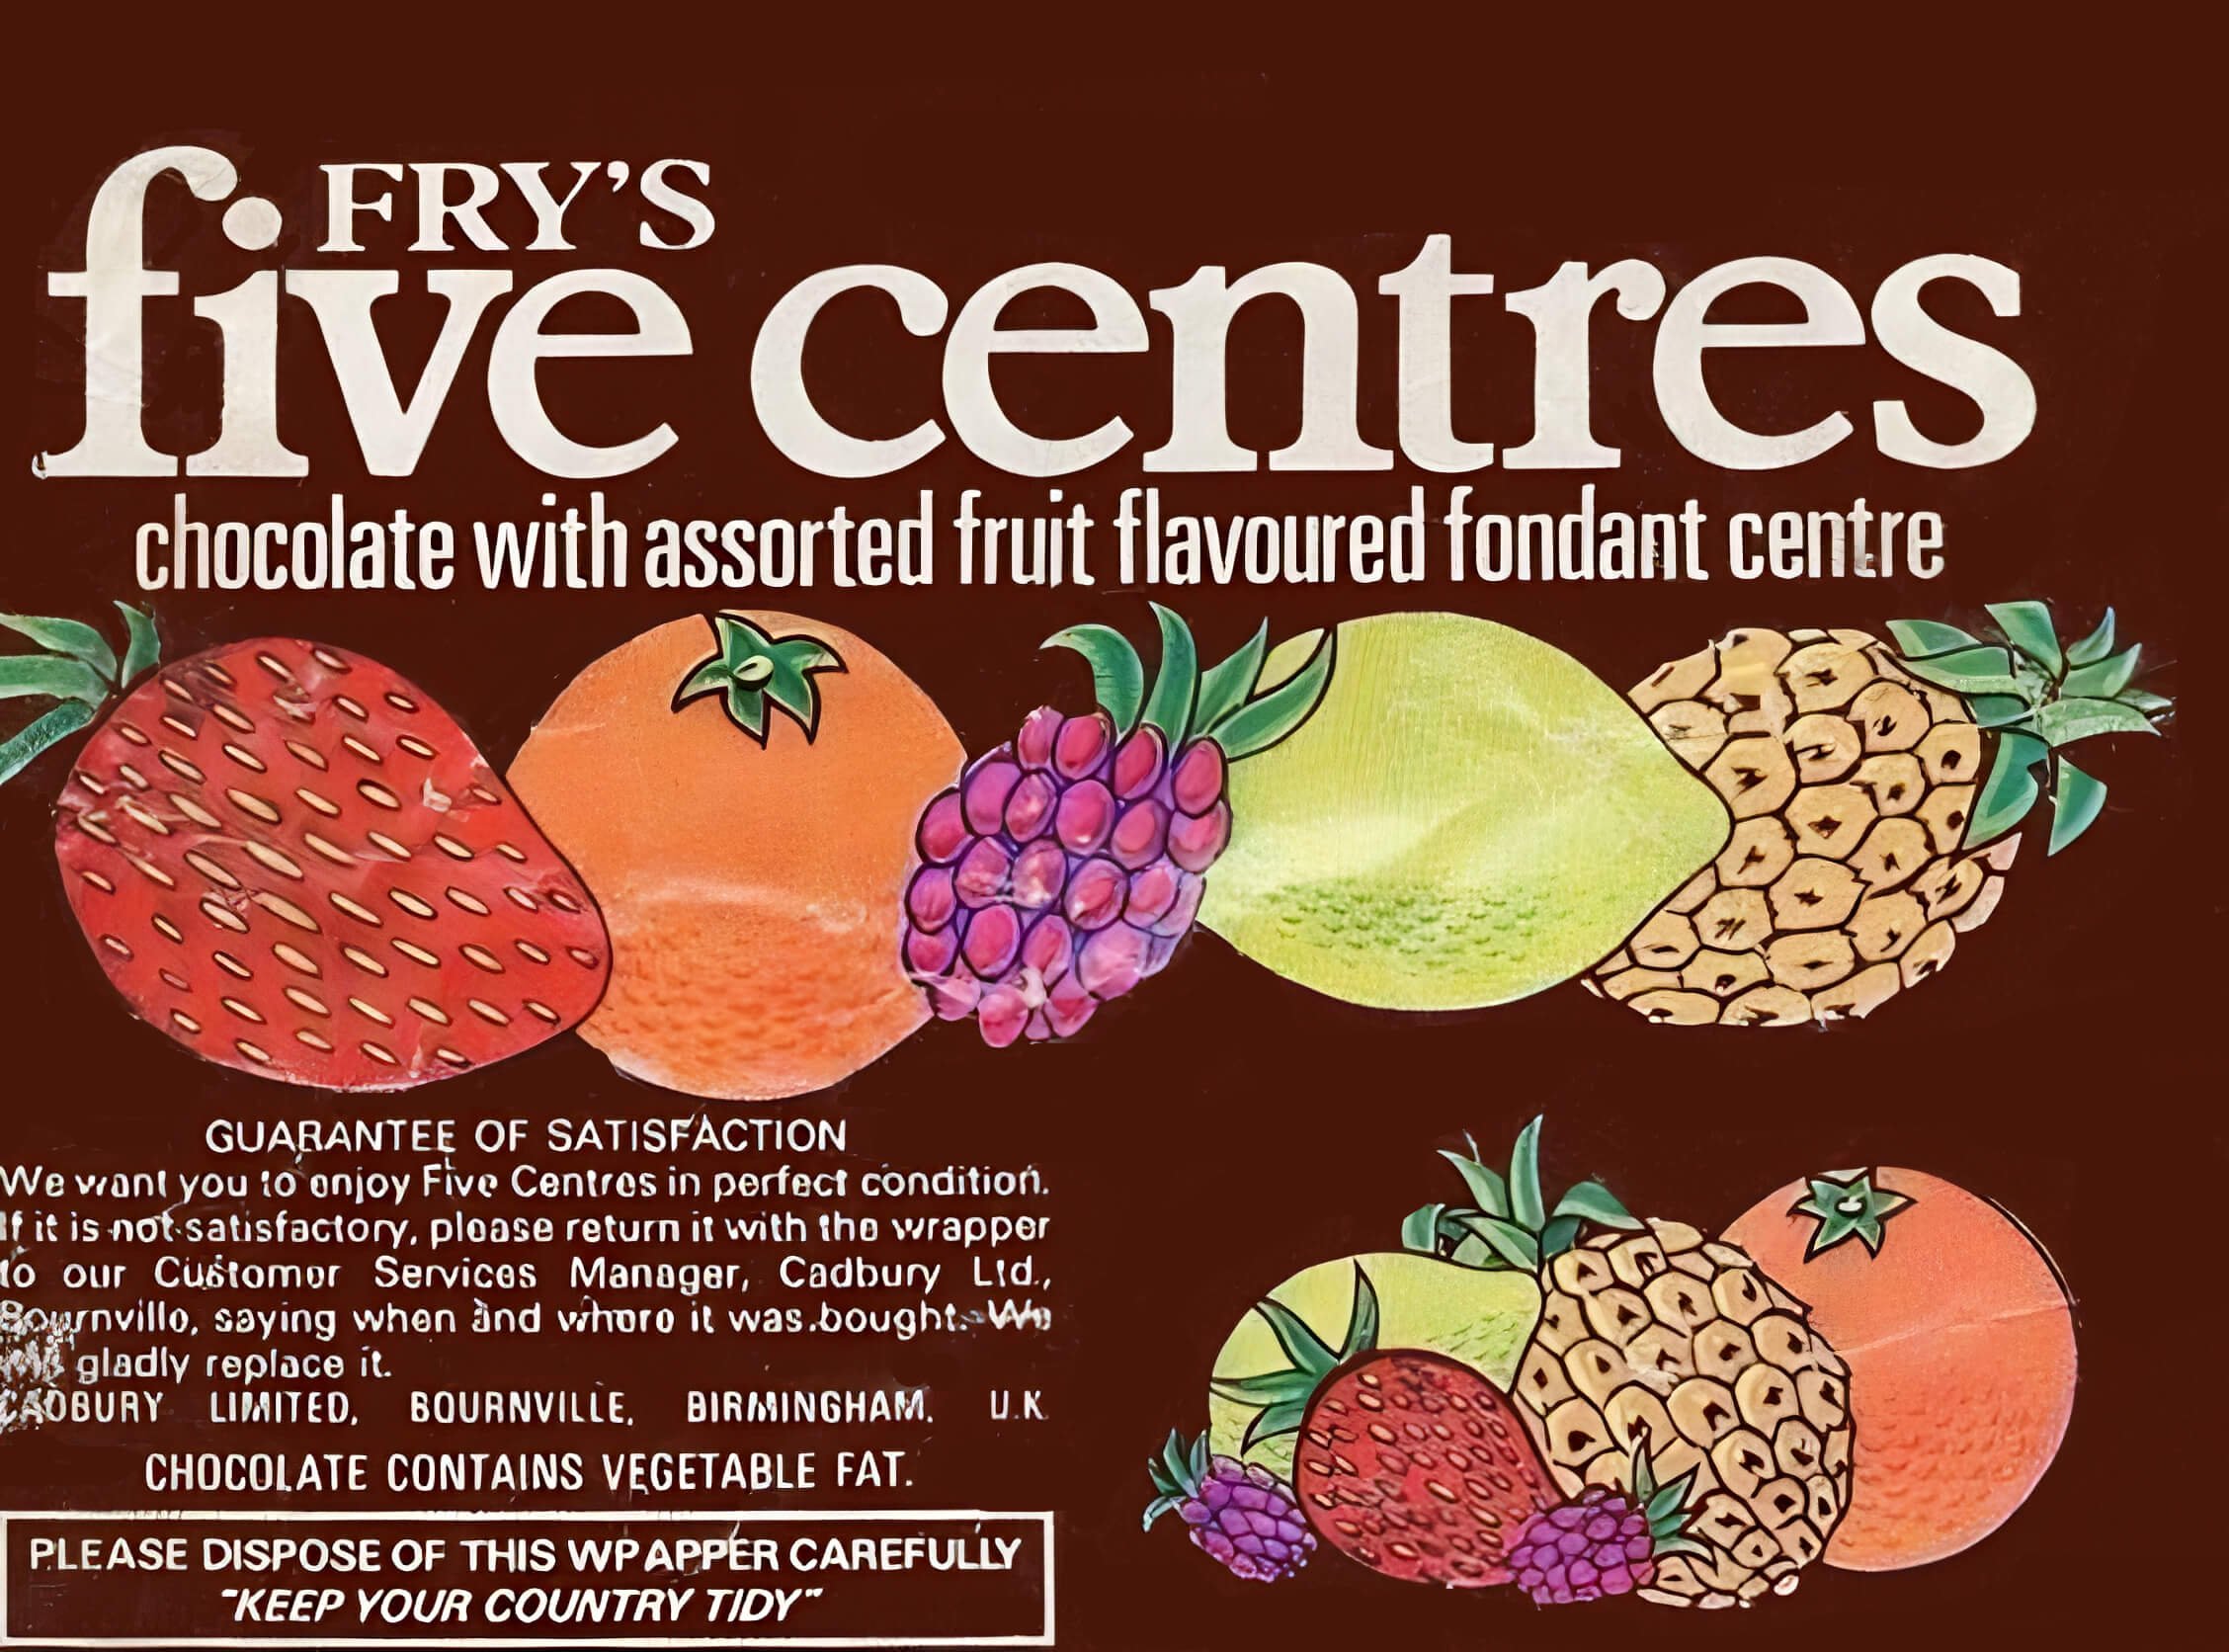 Fry's Five Centres chocolate bar wrapper from the 1970s, brown colour.